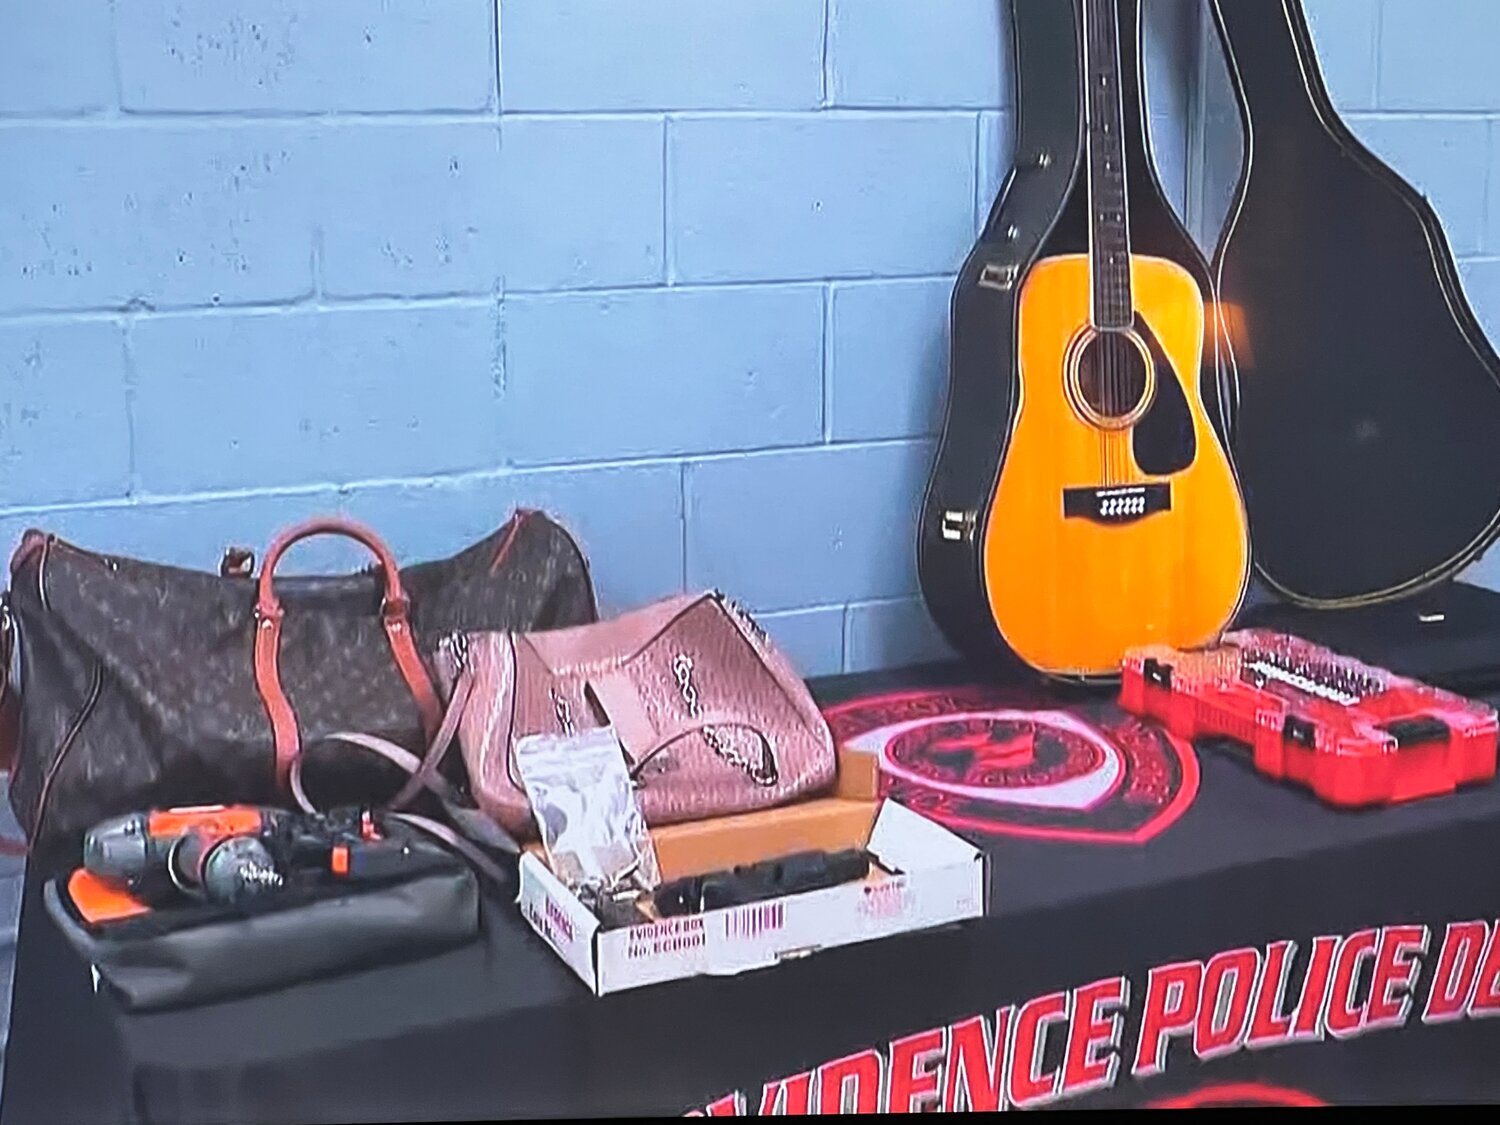 A look at the stolen items recovered by the EPPD.